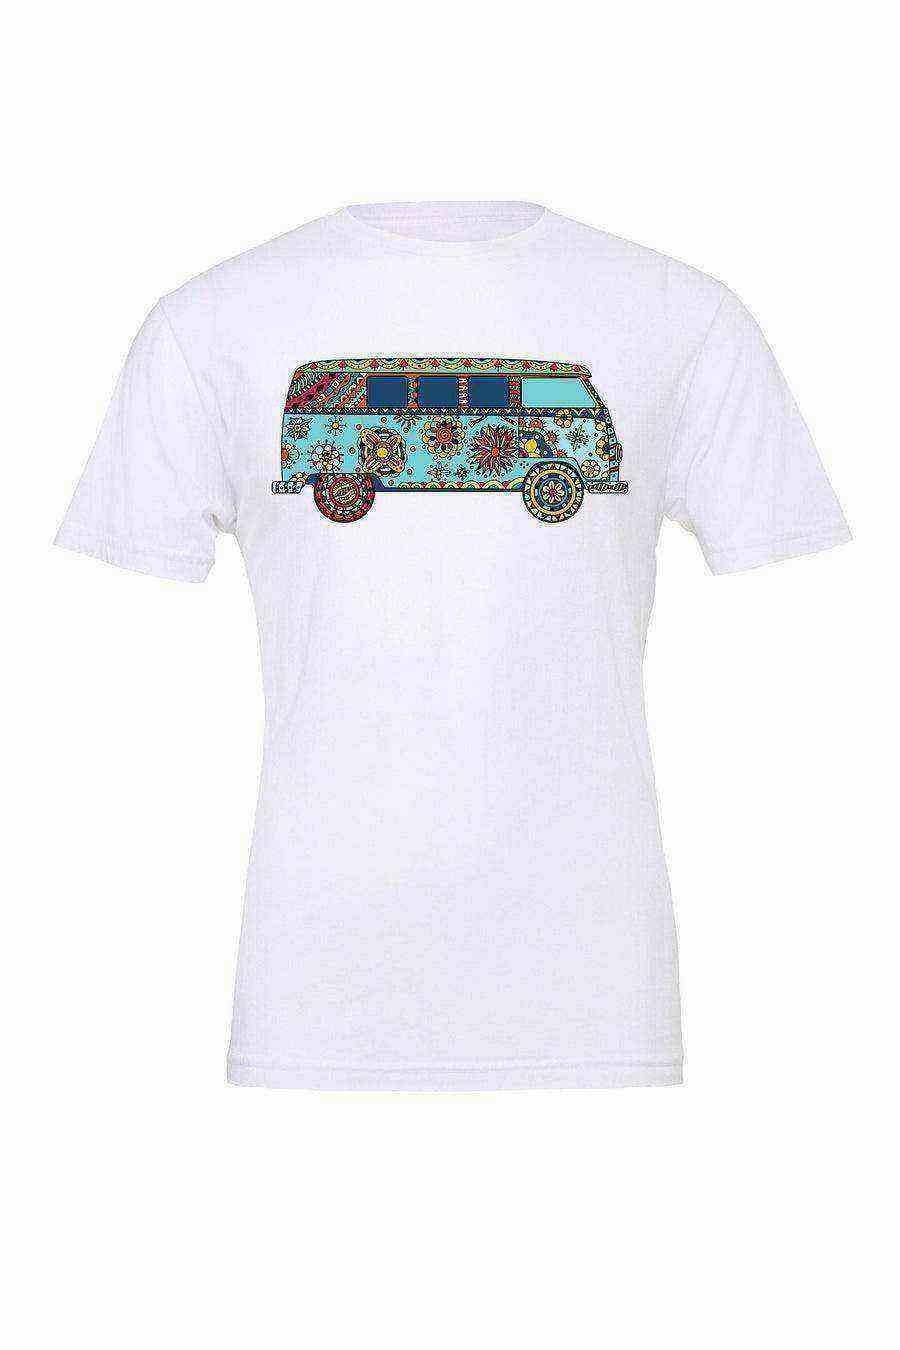 Youth | Peace & Love Bus Tee | Graphic Tee - Dylan's Tees